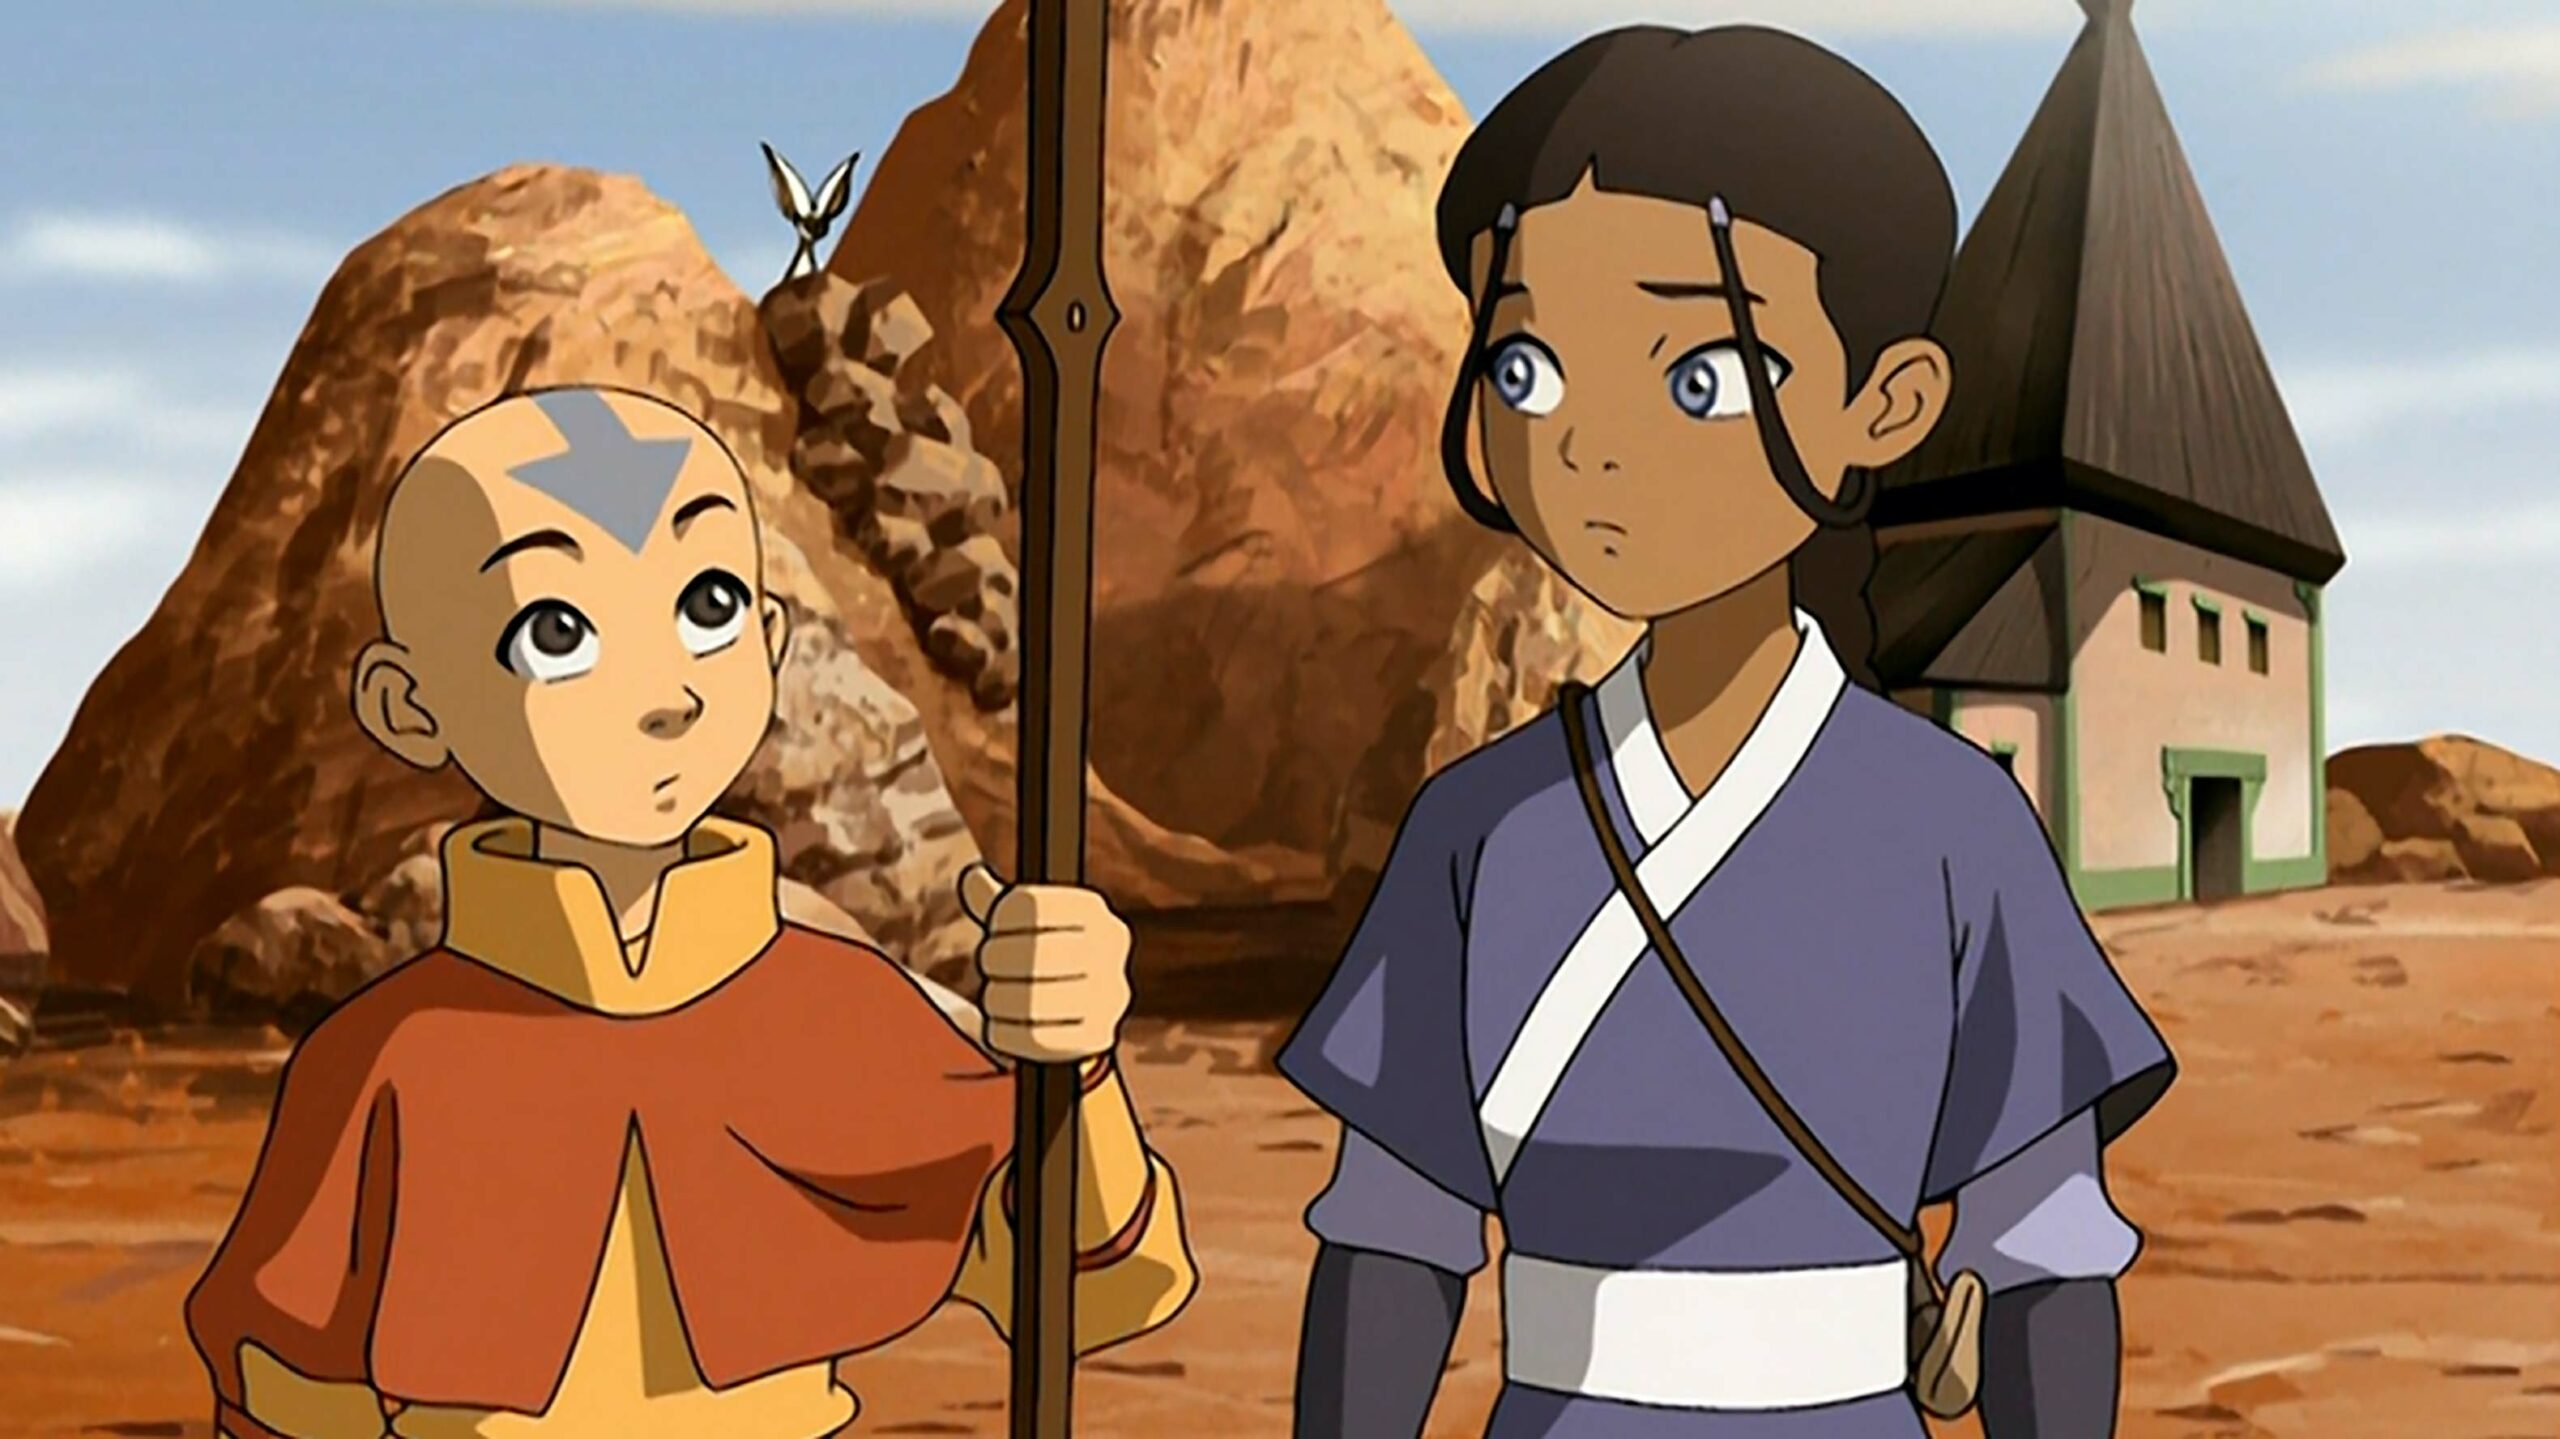 Avatar The Last Airbender fans unhappy with creators leaving Netflix show   CNN